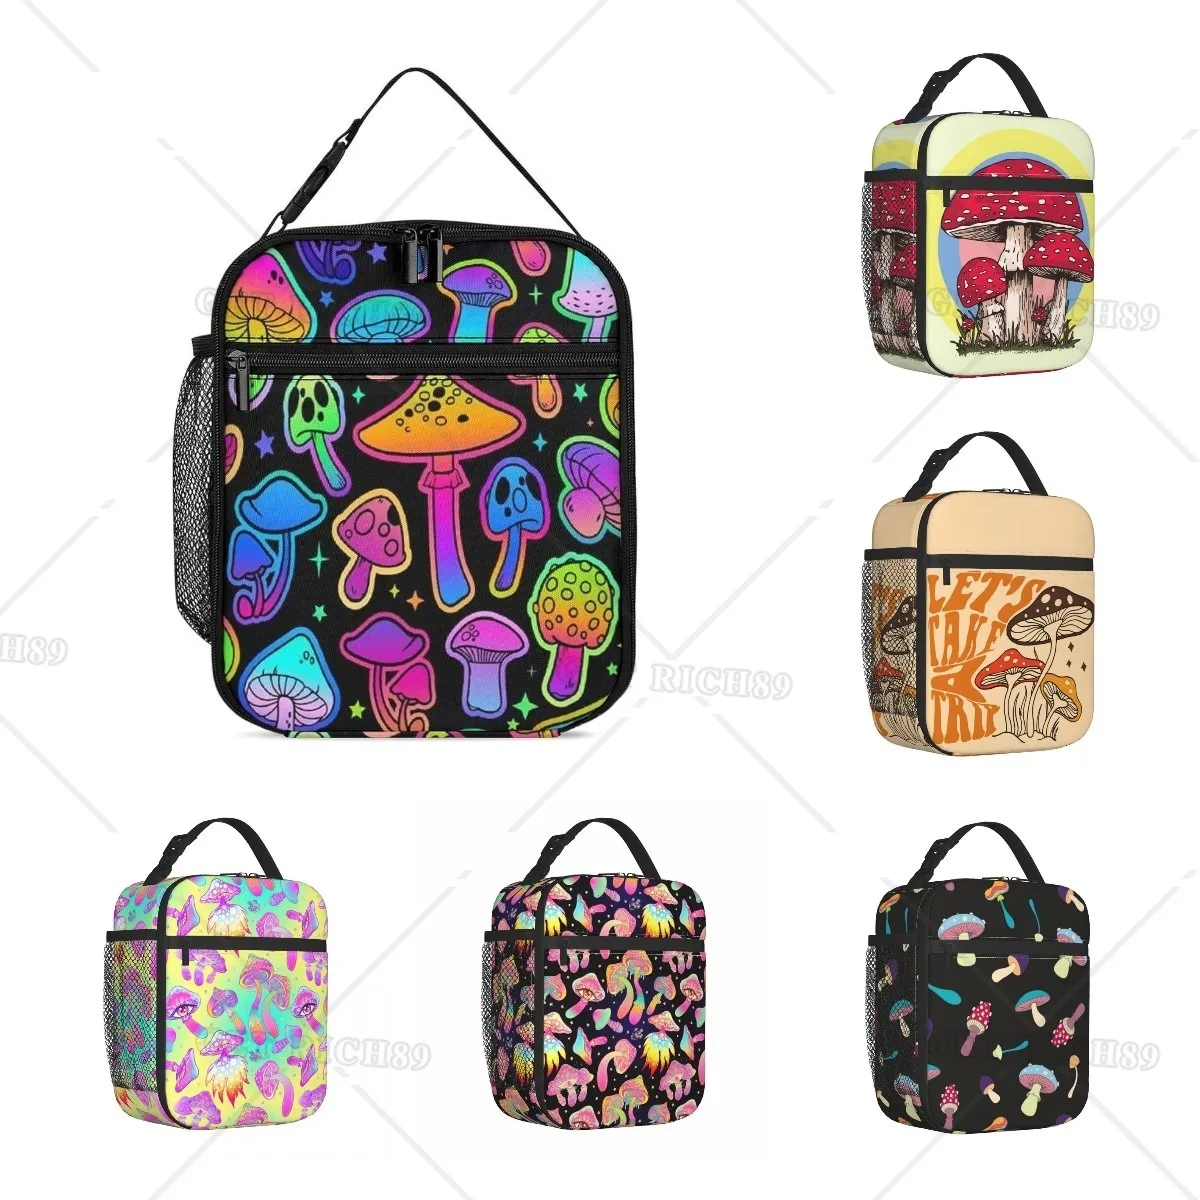 

Mushrooms Magic Colorful Trippy Art Lunch Bag for Men Women Adults Picnic Travel - Leakproof Organizer Portable Totebox